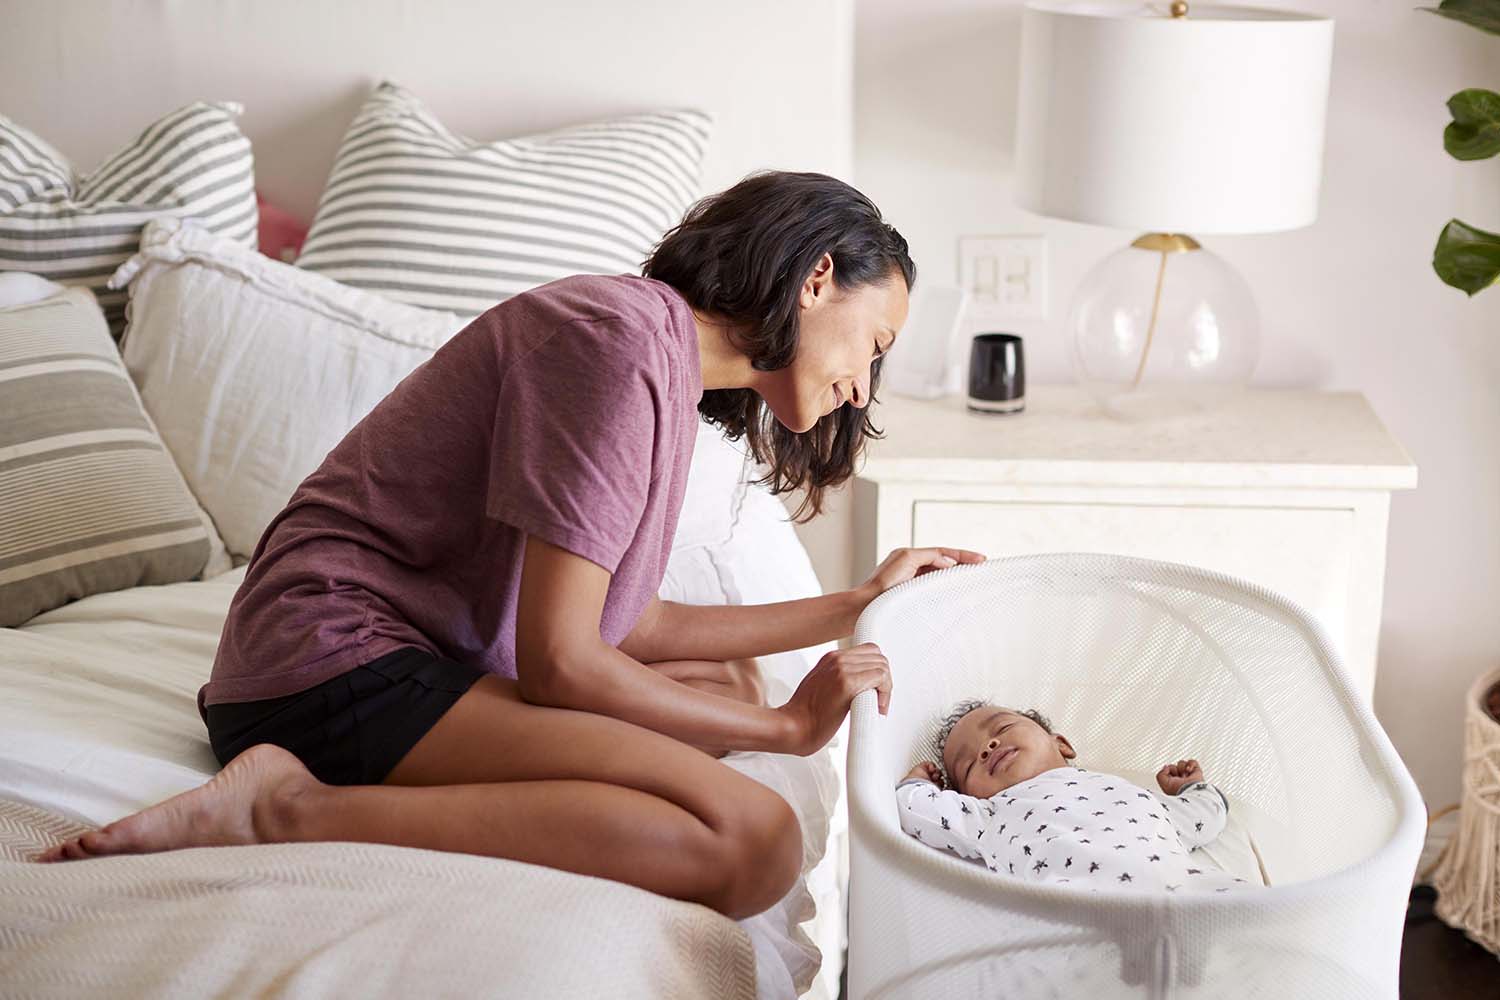 Black woman in a pink shirt and black shorts leans over a sleeping baby in a white bassinet